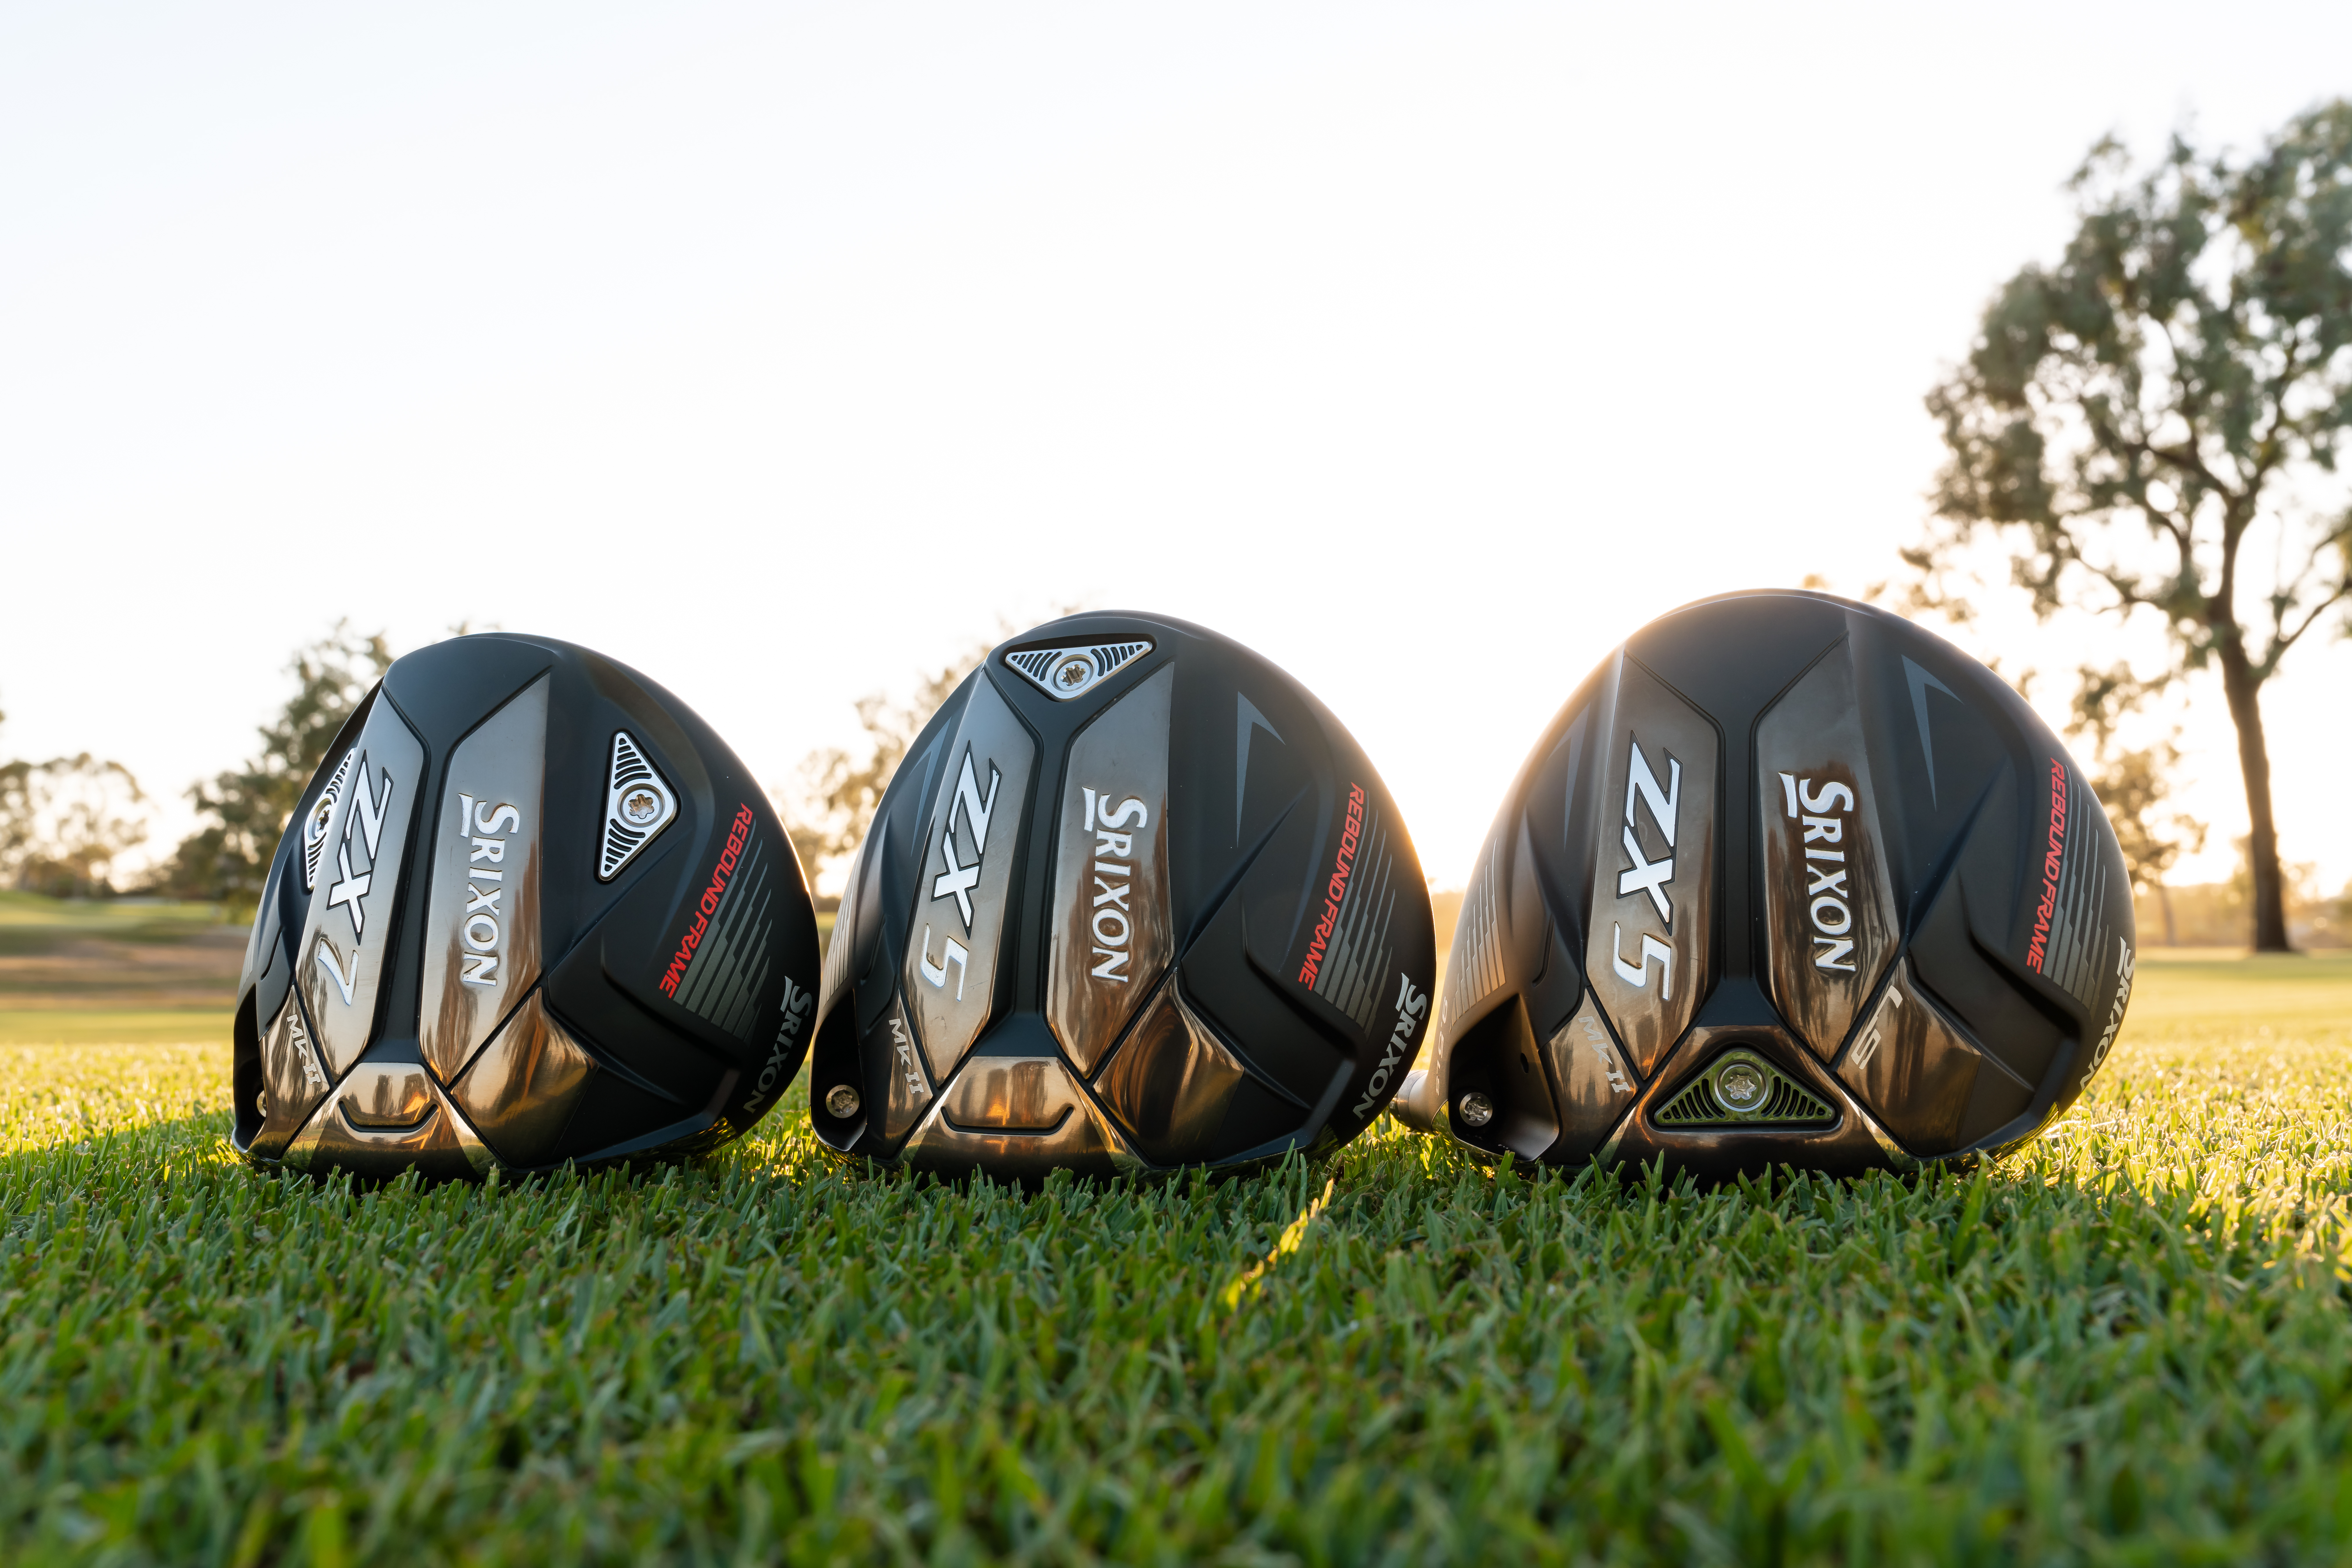 Srixon ZX Mk II drivers: What you need to know | Golf Equipment